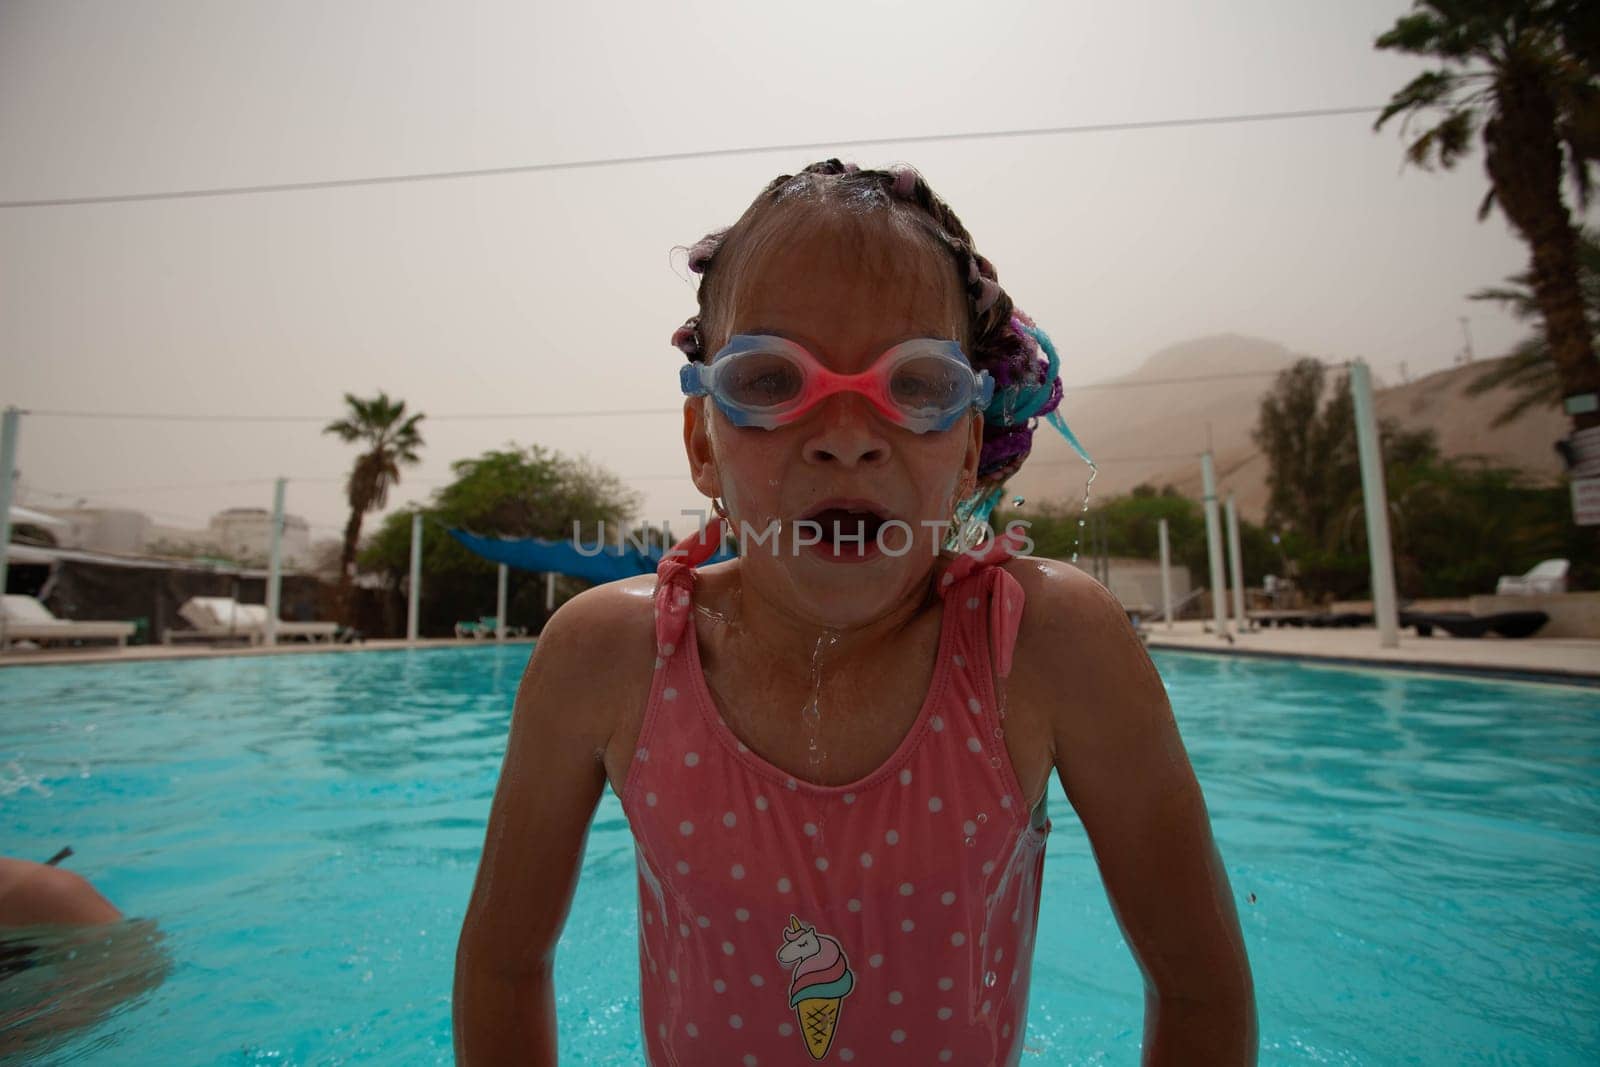 A girl with glasses and bright pigtails swims in the pool. High quality photo